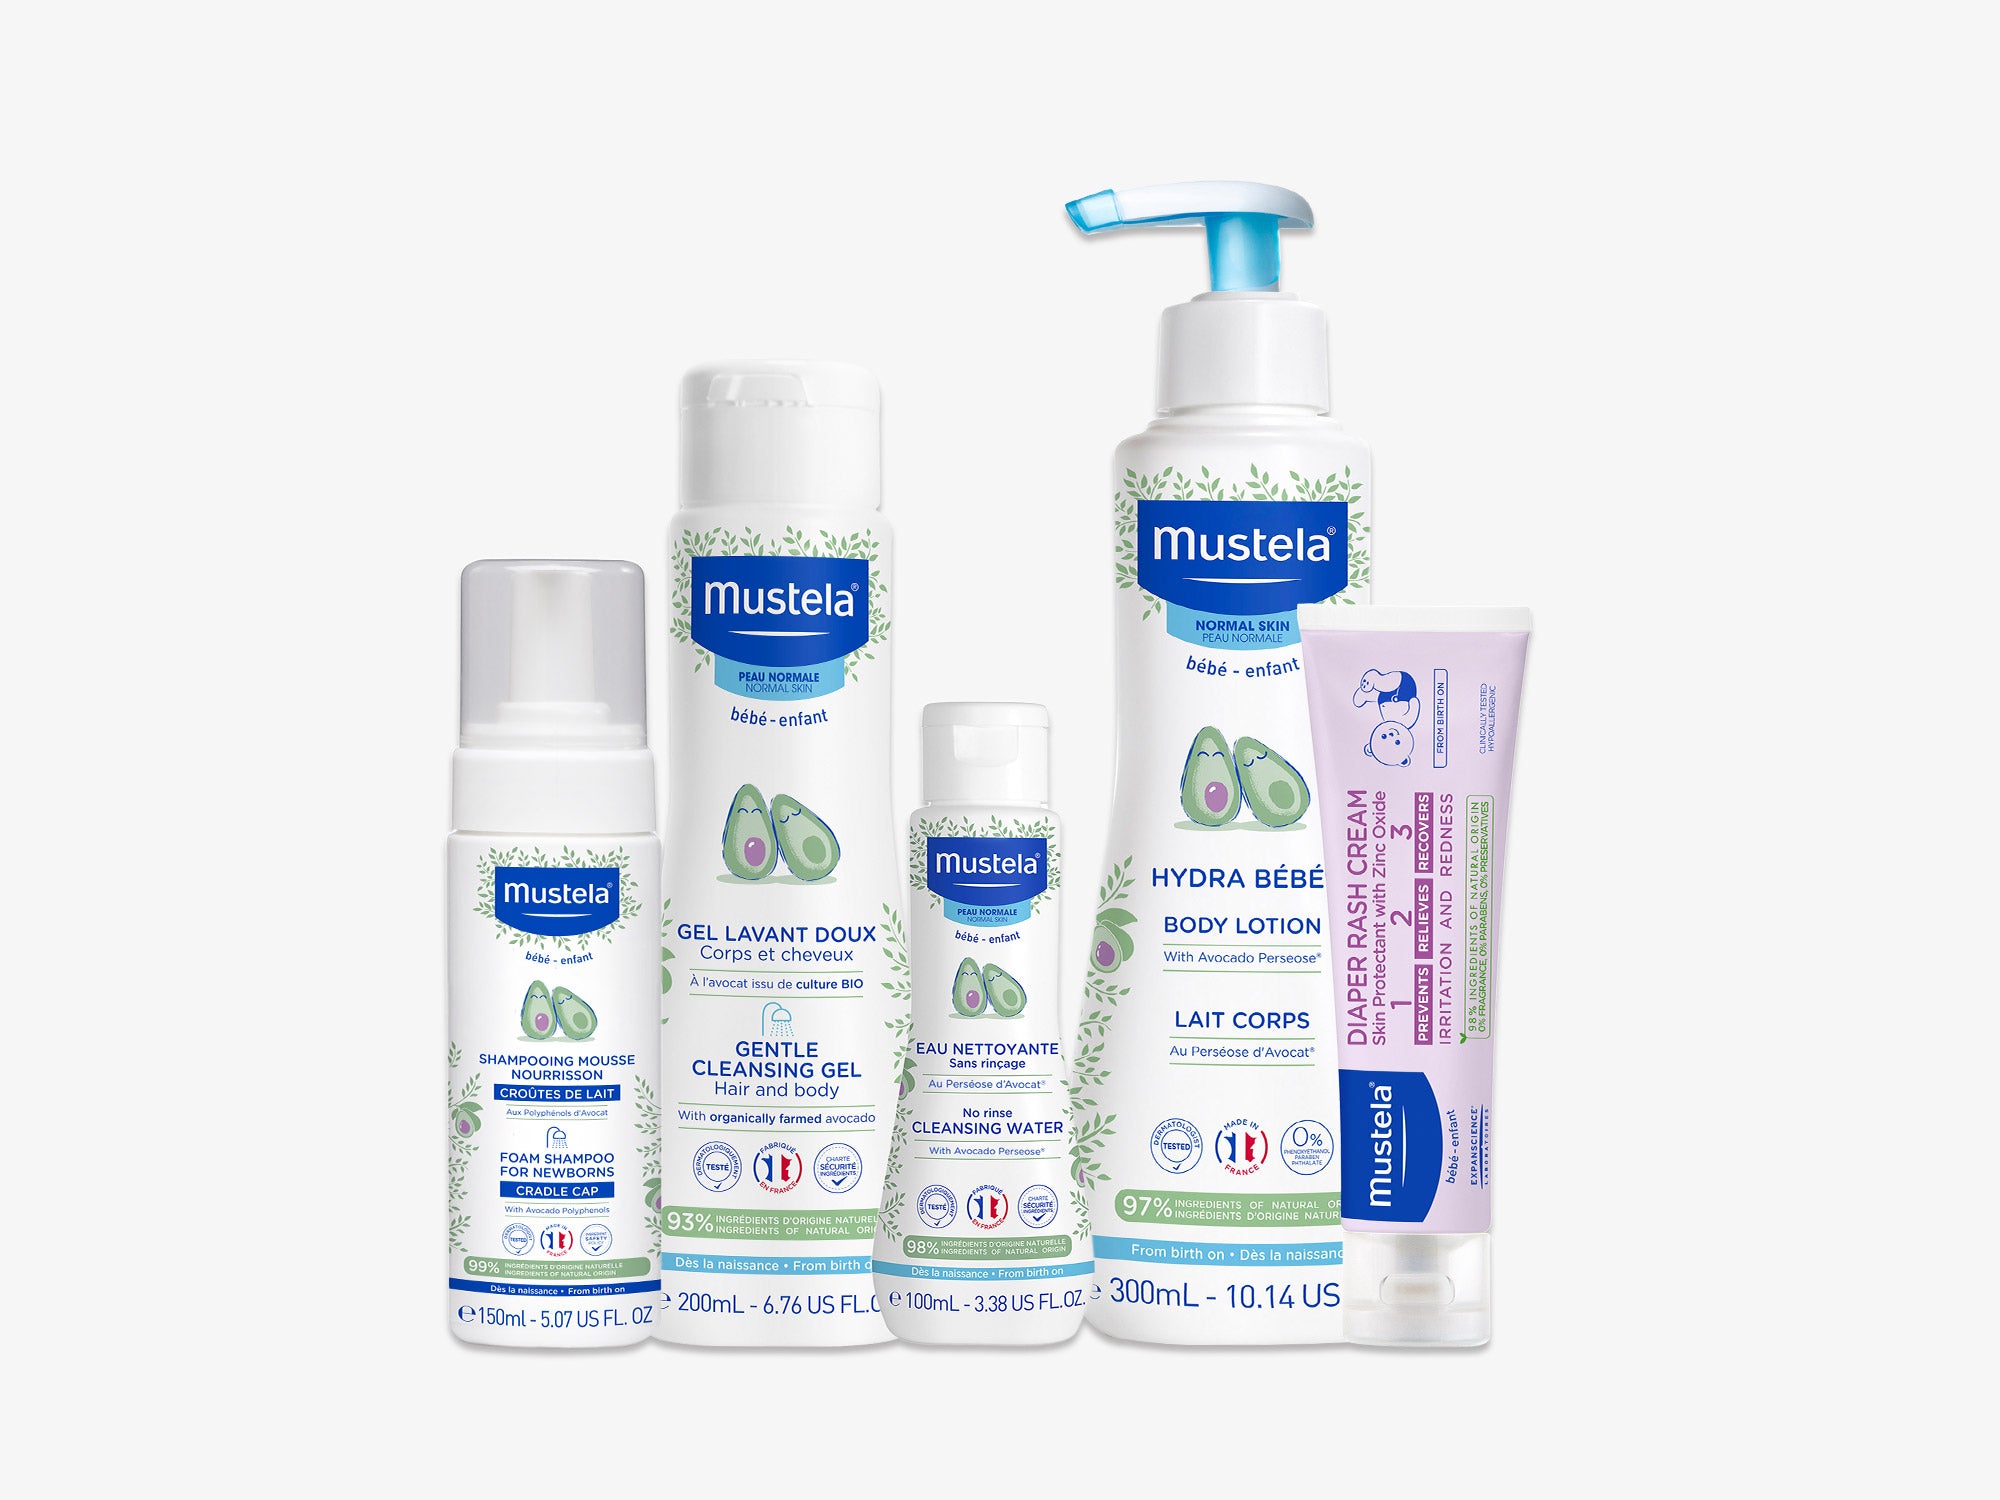  Mustela Newborn Arrival Gift Set - Baby Skincare & Bath Time  Essentials - Natural & Plant Based - 5 Items Set : Baby